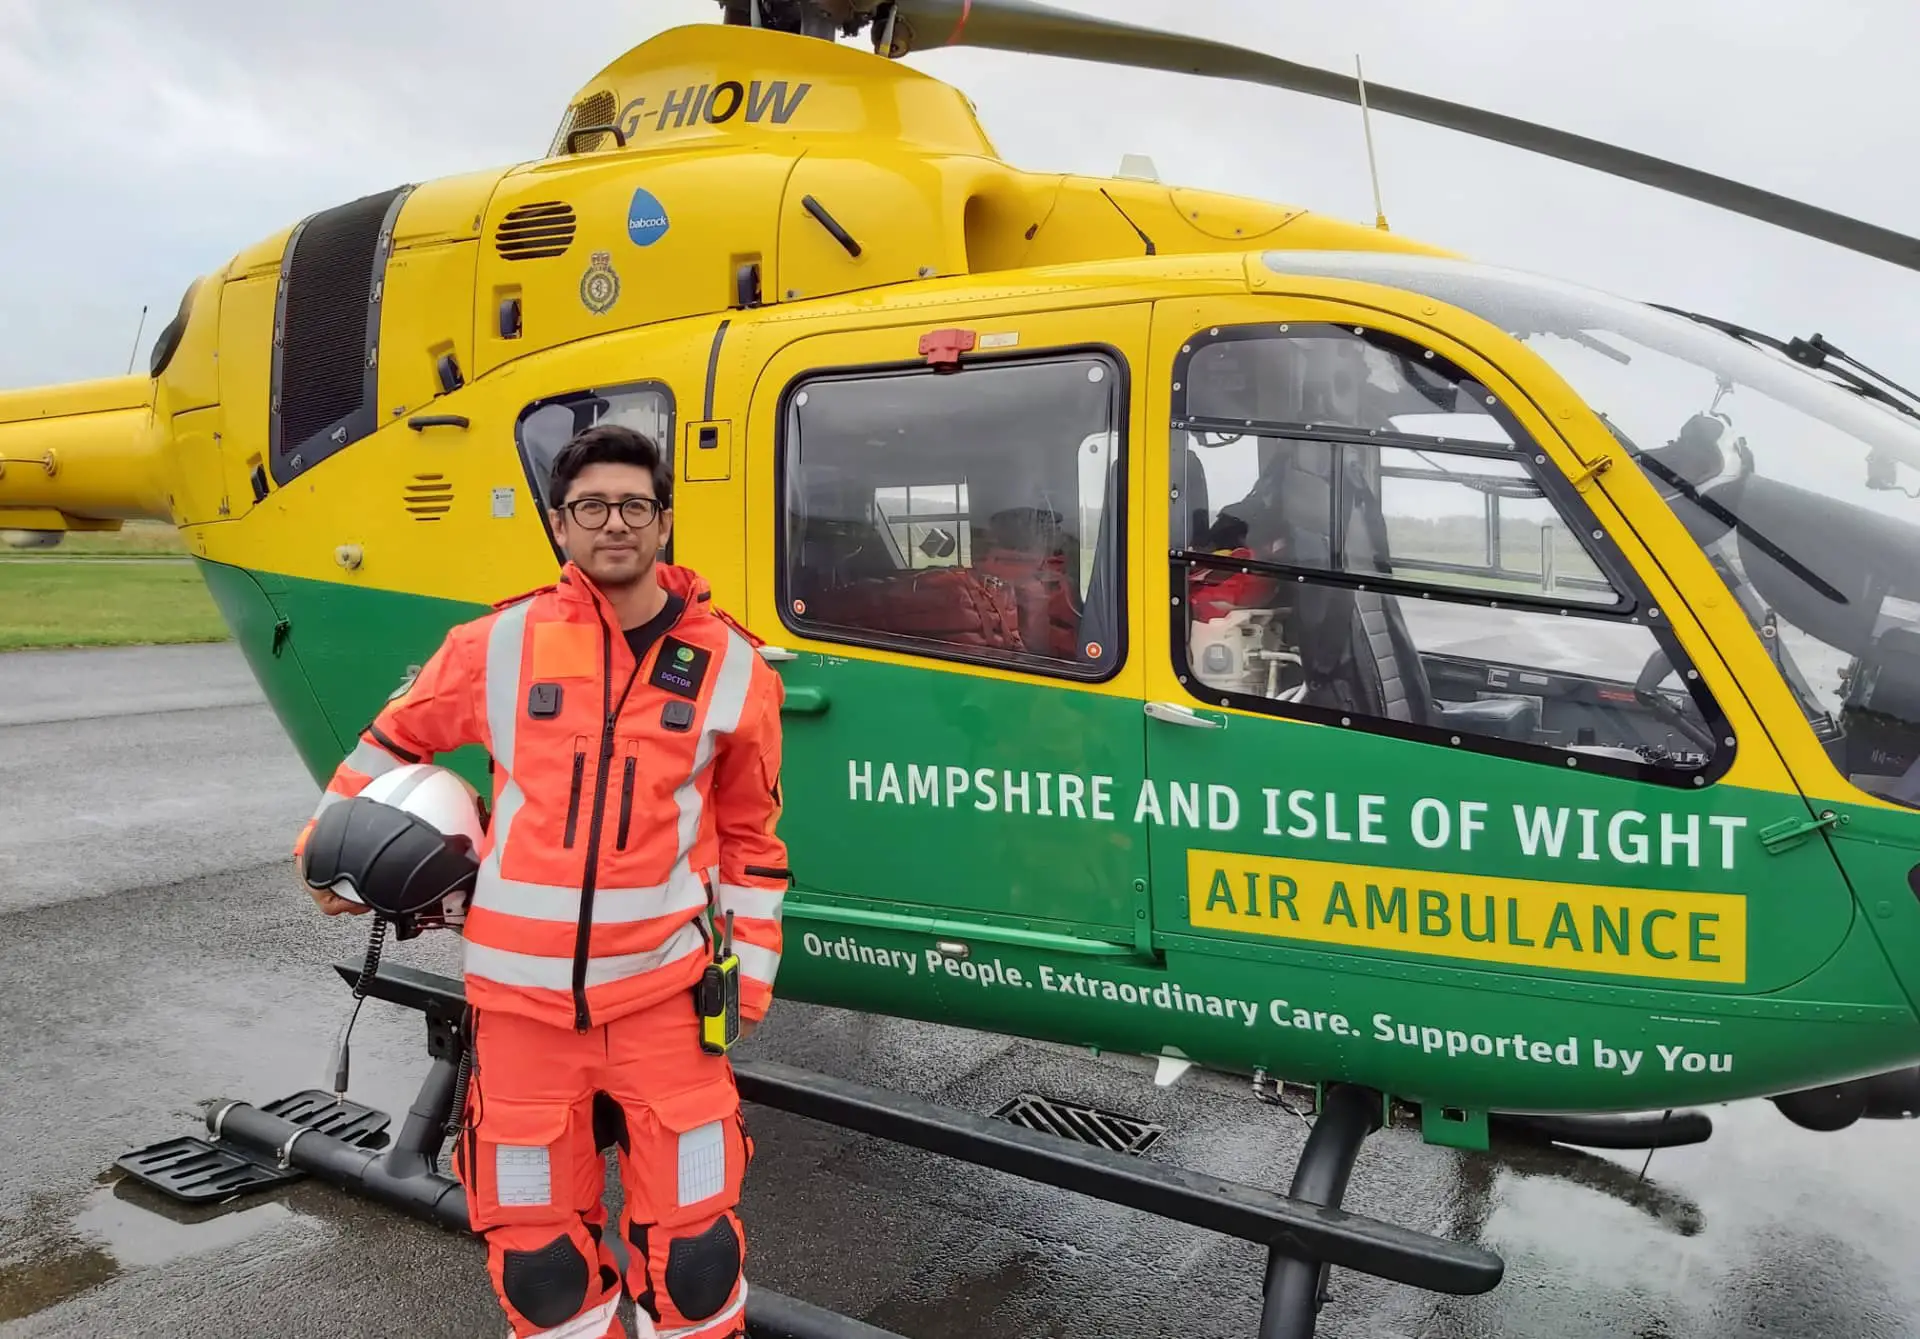 Dr Chris Beng next to the air ambulance helicopter